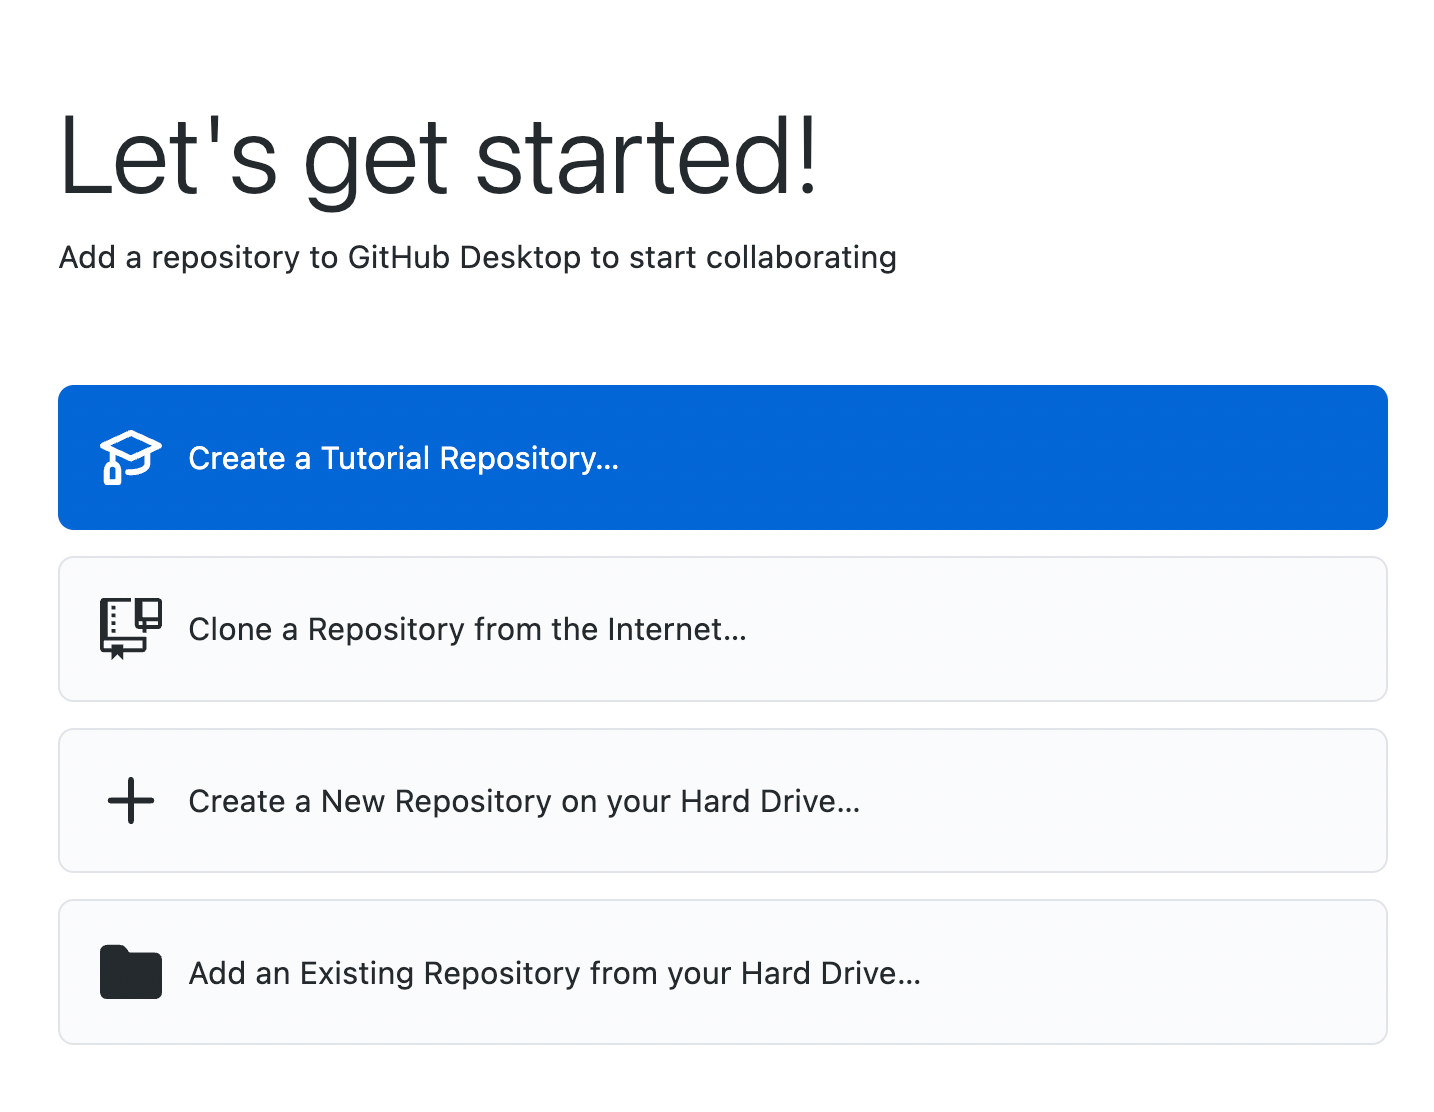 Screenshot of the "Let's get started!" view in GitHub Desktop.